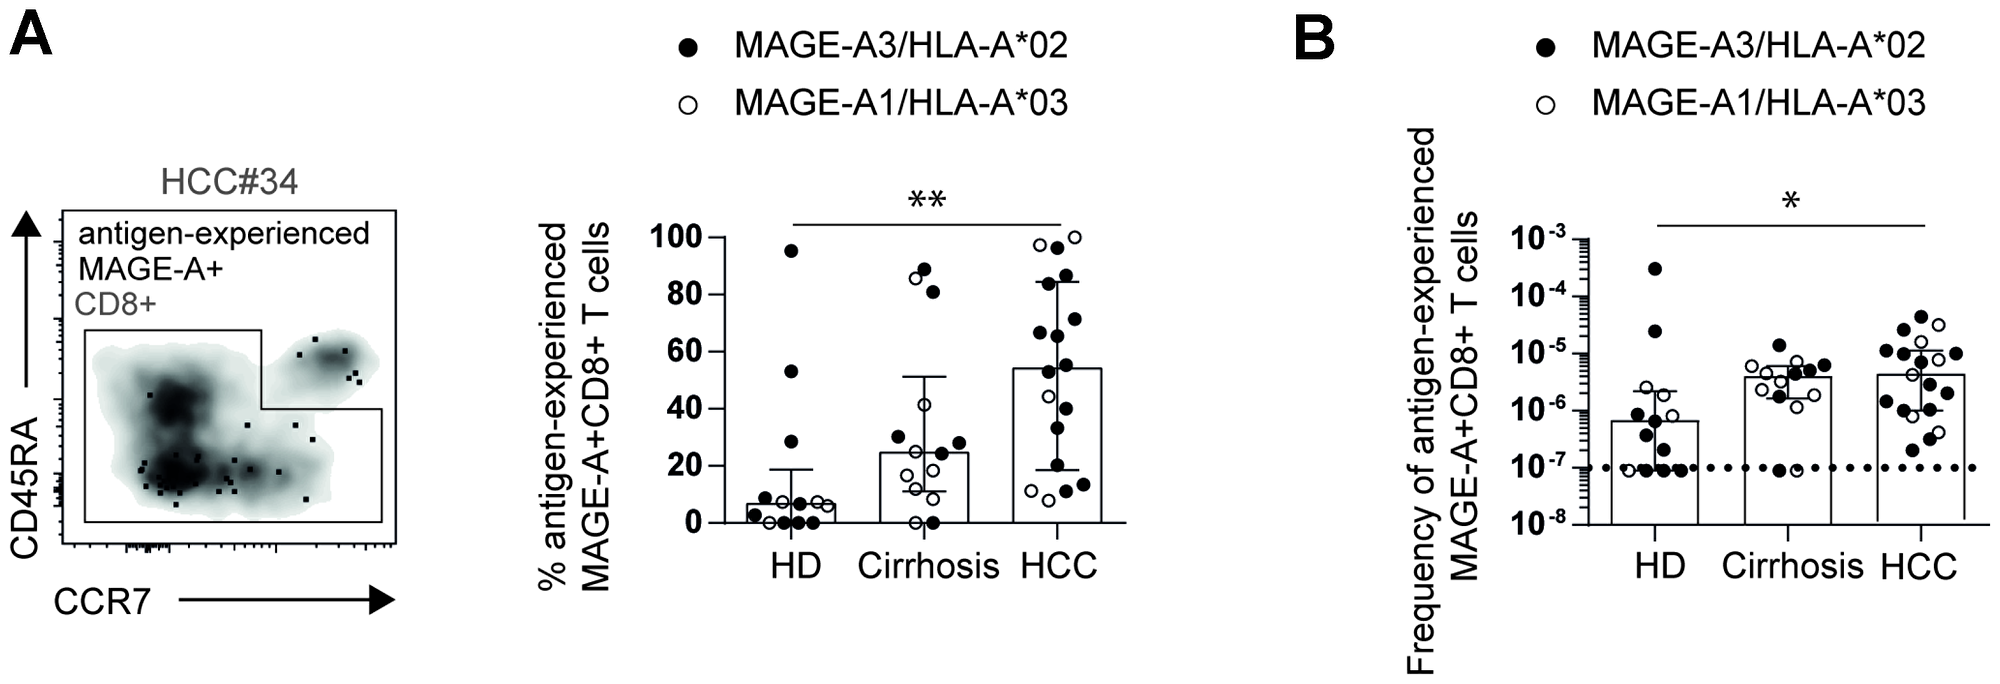 Increased frequencies of circulating antigen-experienced MAGE-A-specific CD8+ T cells in HCC patients.